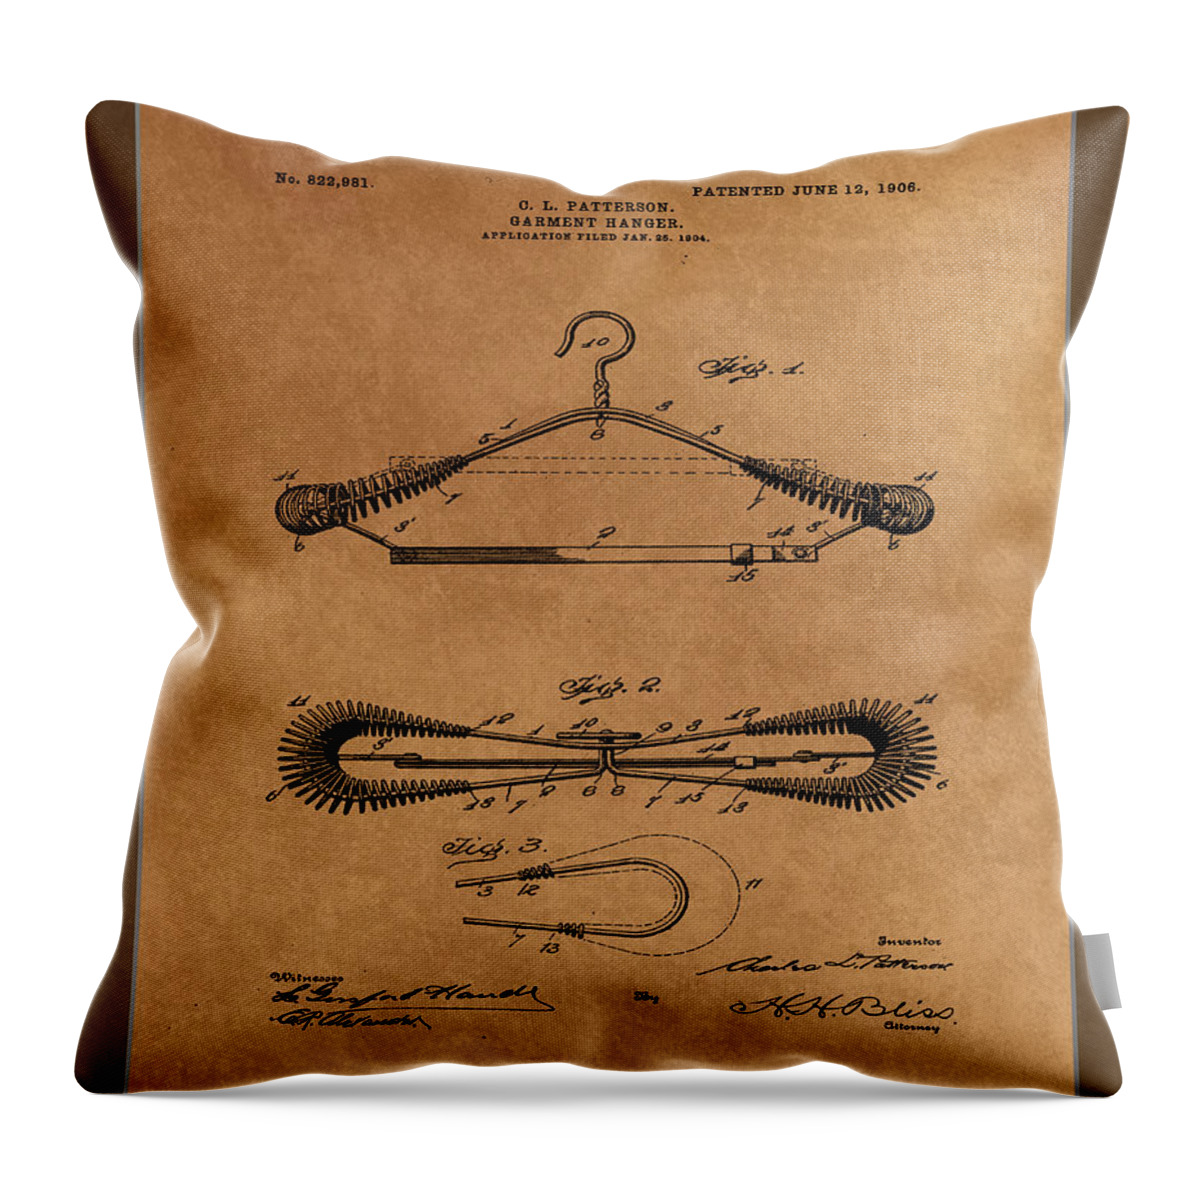 Patent Throw Pillow featuring the mixed media Garment Hanger Patent Drawing by Brian Reaves